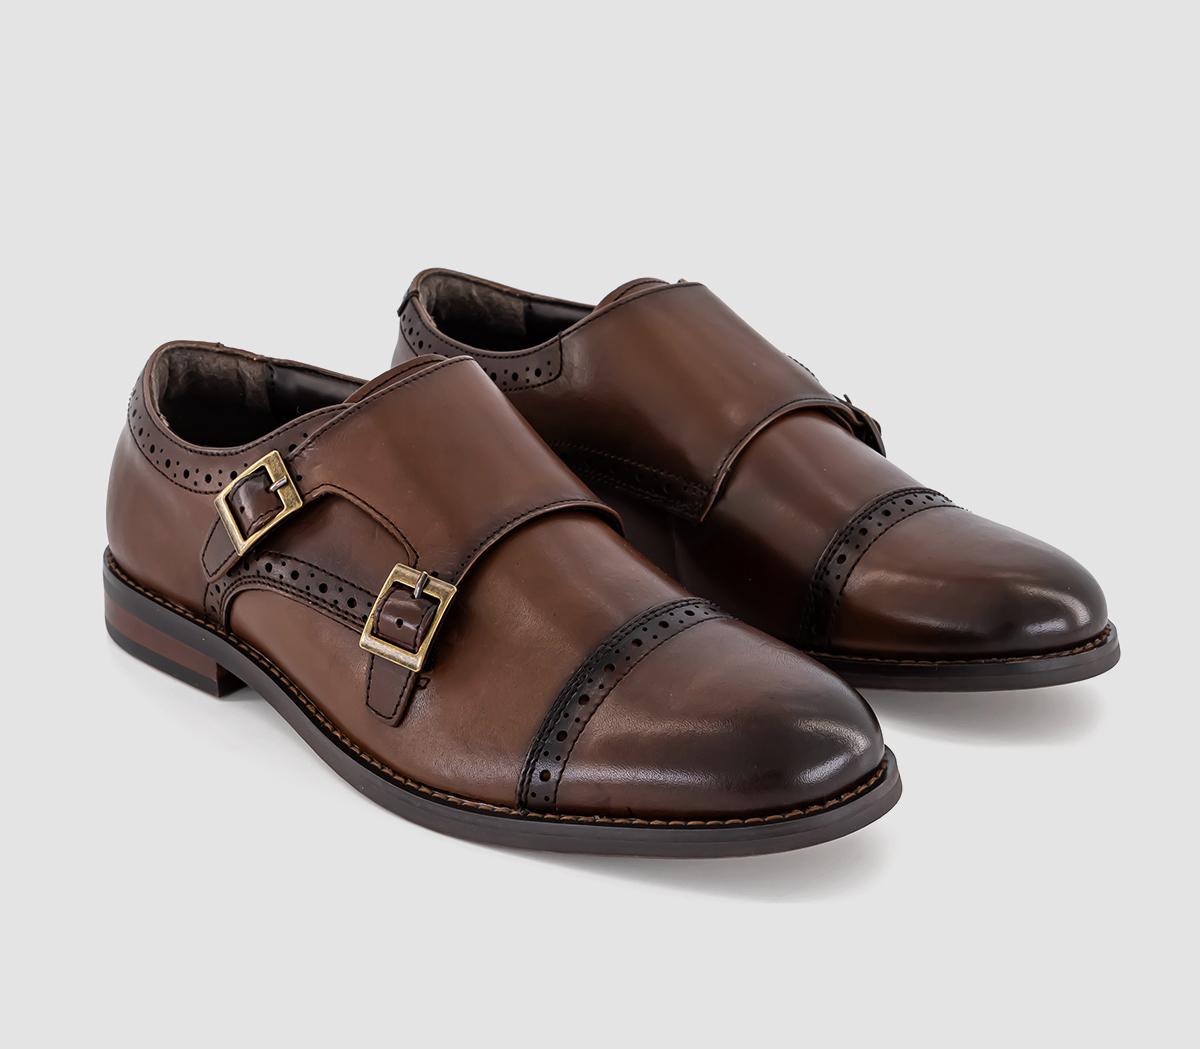 OFFICE Mens Myles Double Strap Monk Shoes Brown Leather, 12